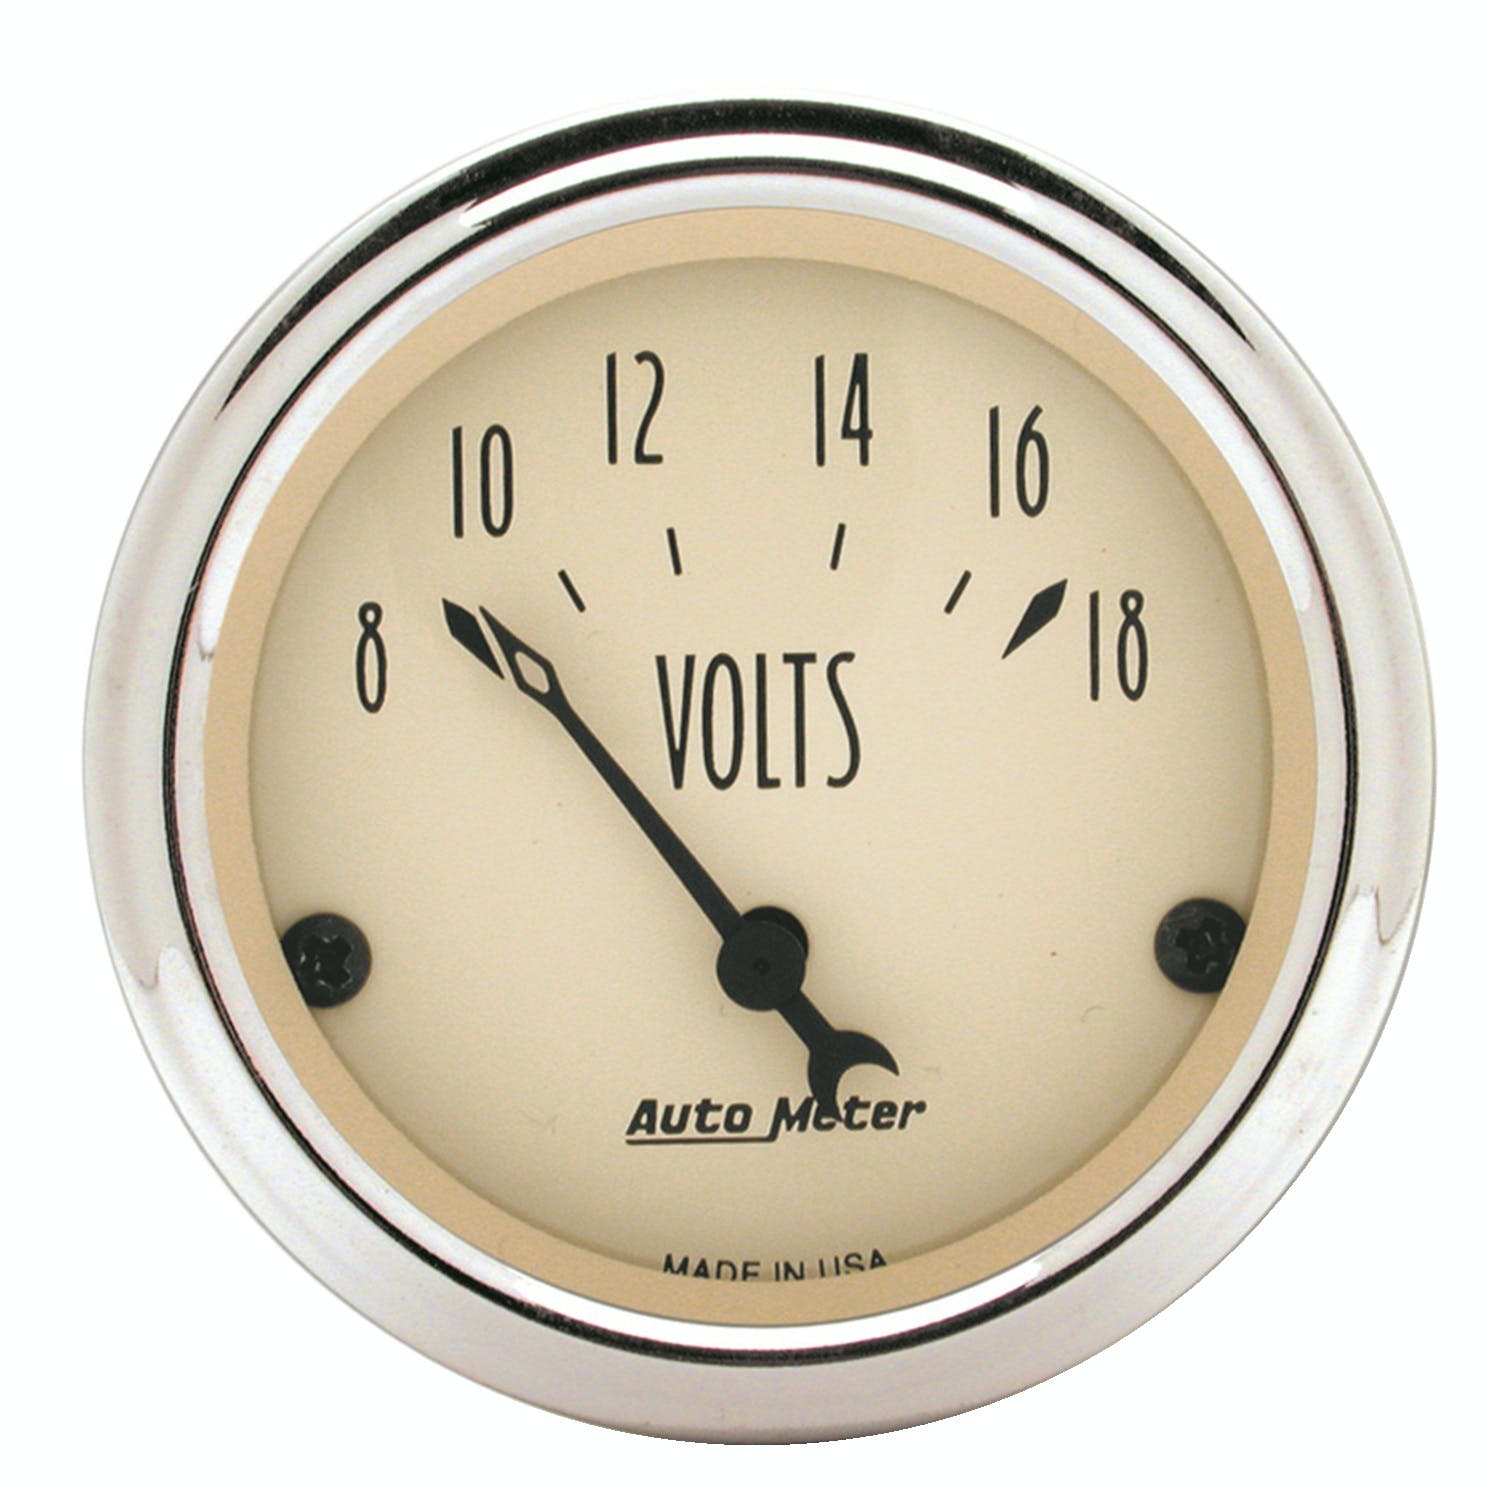 AutoMeter Products 1891 Voltmeter 8-18 Volts